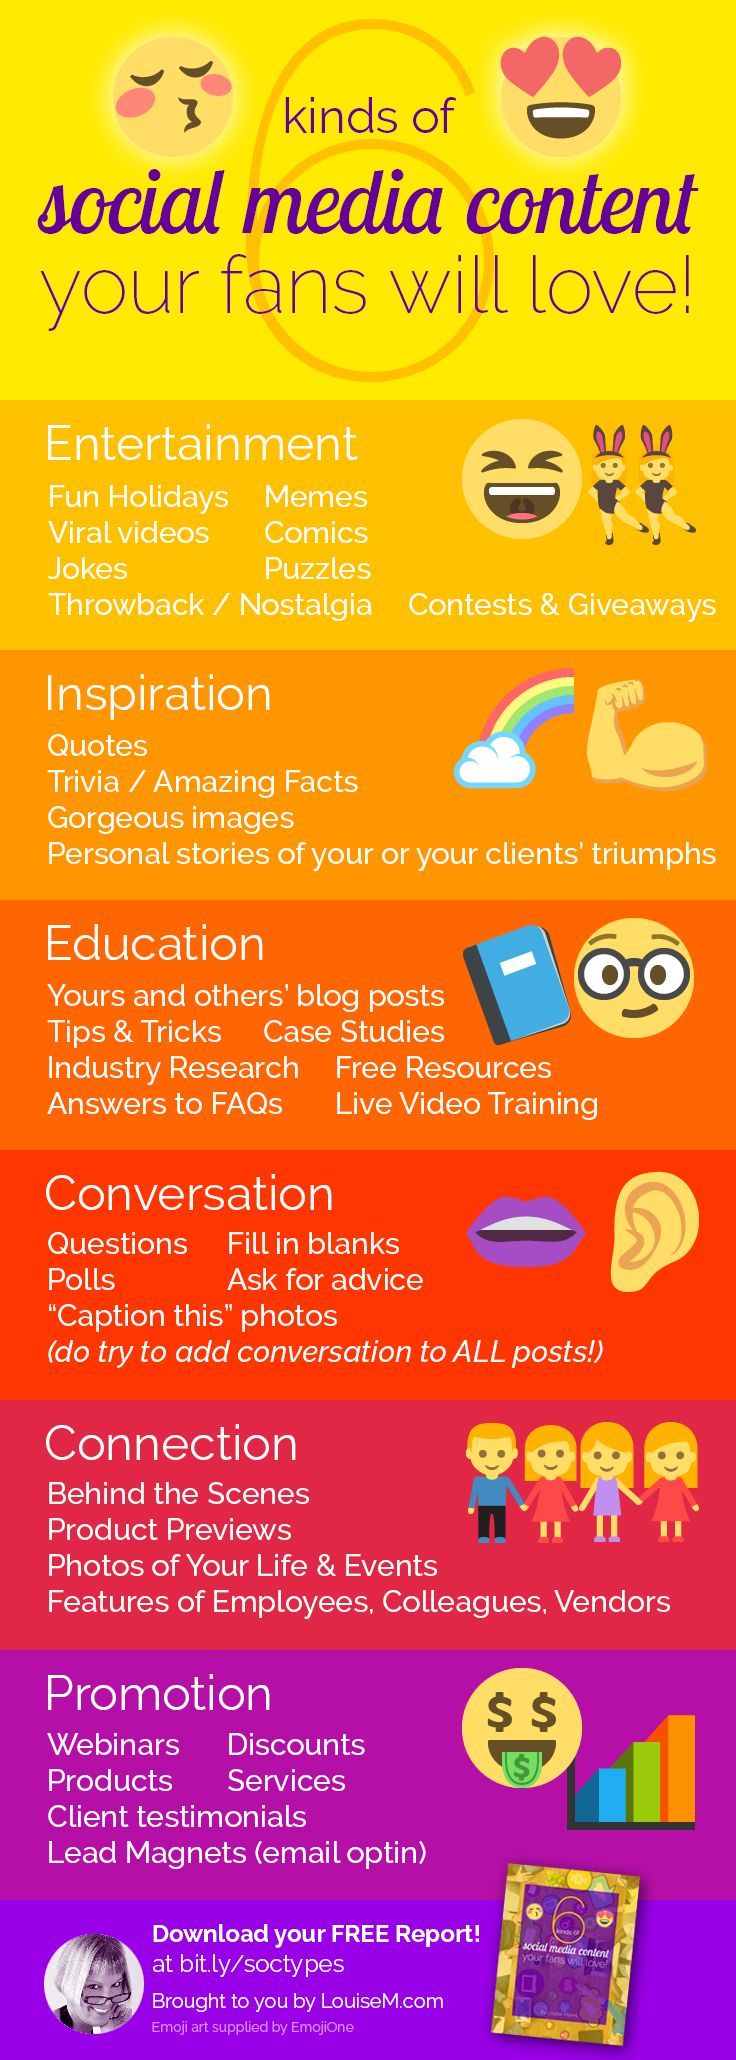 1530165299_957_Marketing-Infographic-Social-media-marketing-tips-Click-to-blog-for-FREE-download-with-content-catego Marketing Infographic : Social media marketing tips: Click to blog for FREE download with content catego...